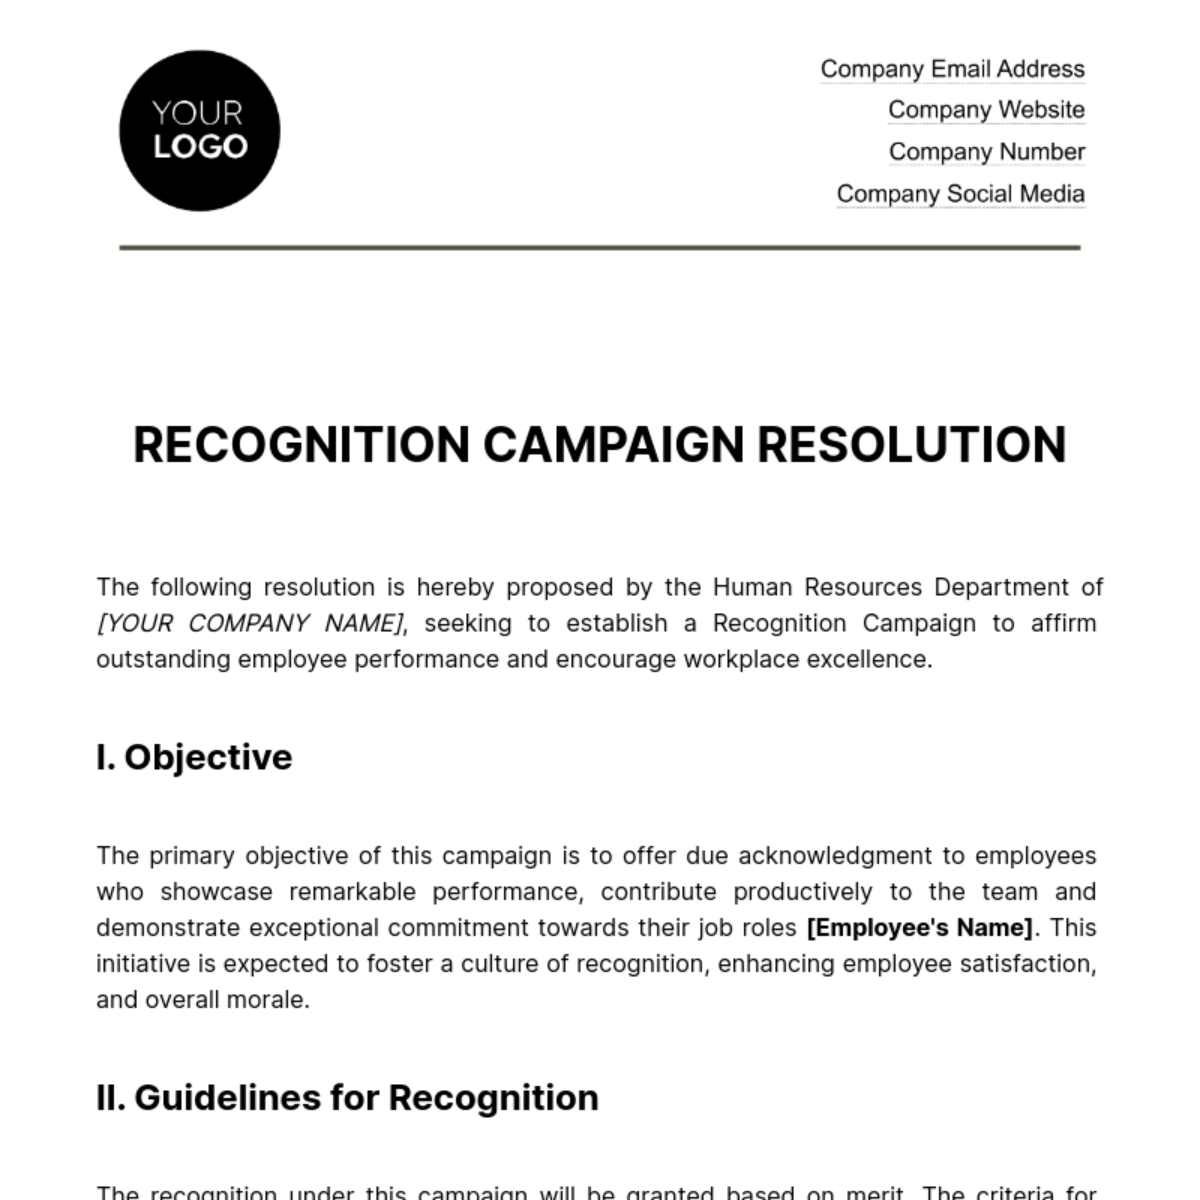 Recognition Campaign Resolution HR Template